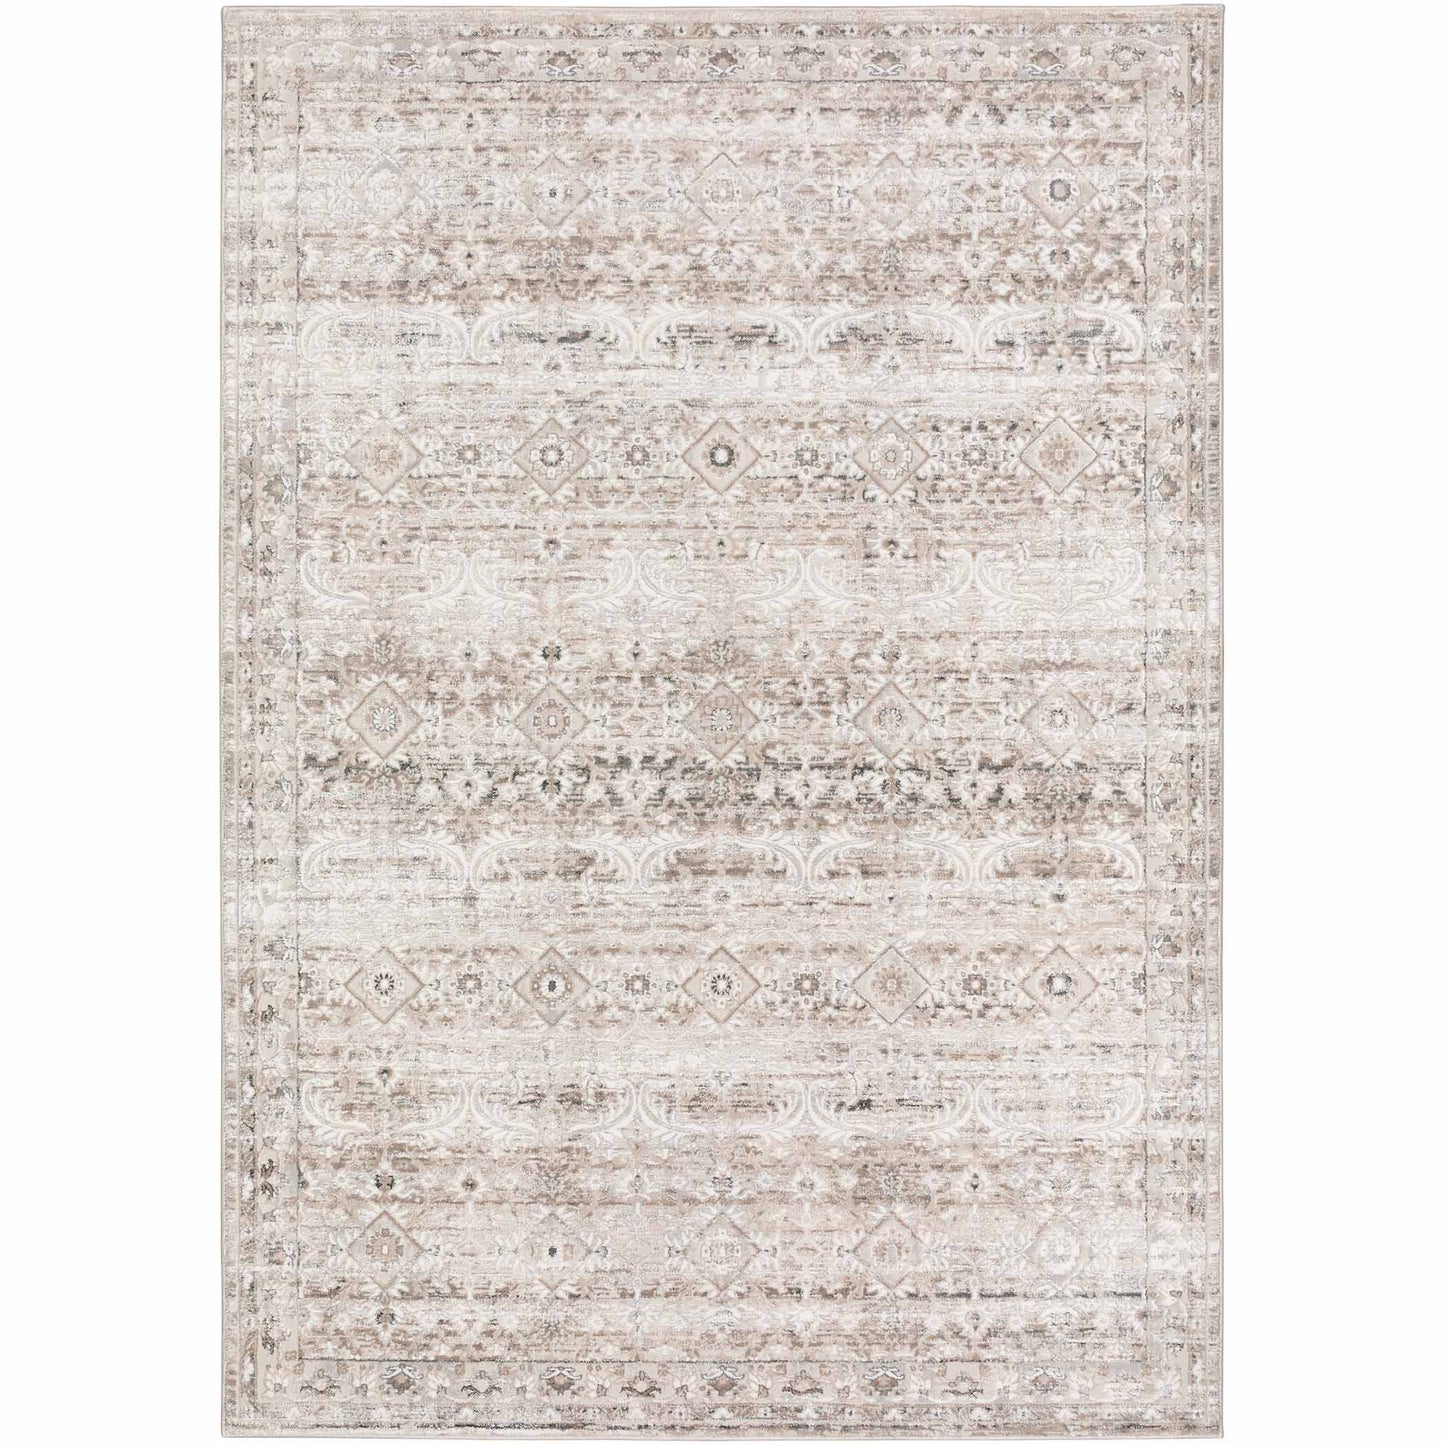 Dalyn Rugs Rhodes RR7 Taupe Transitional Power Woven Rug